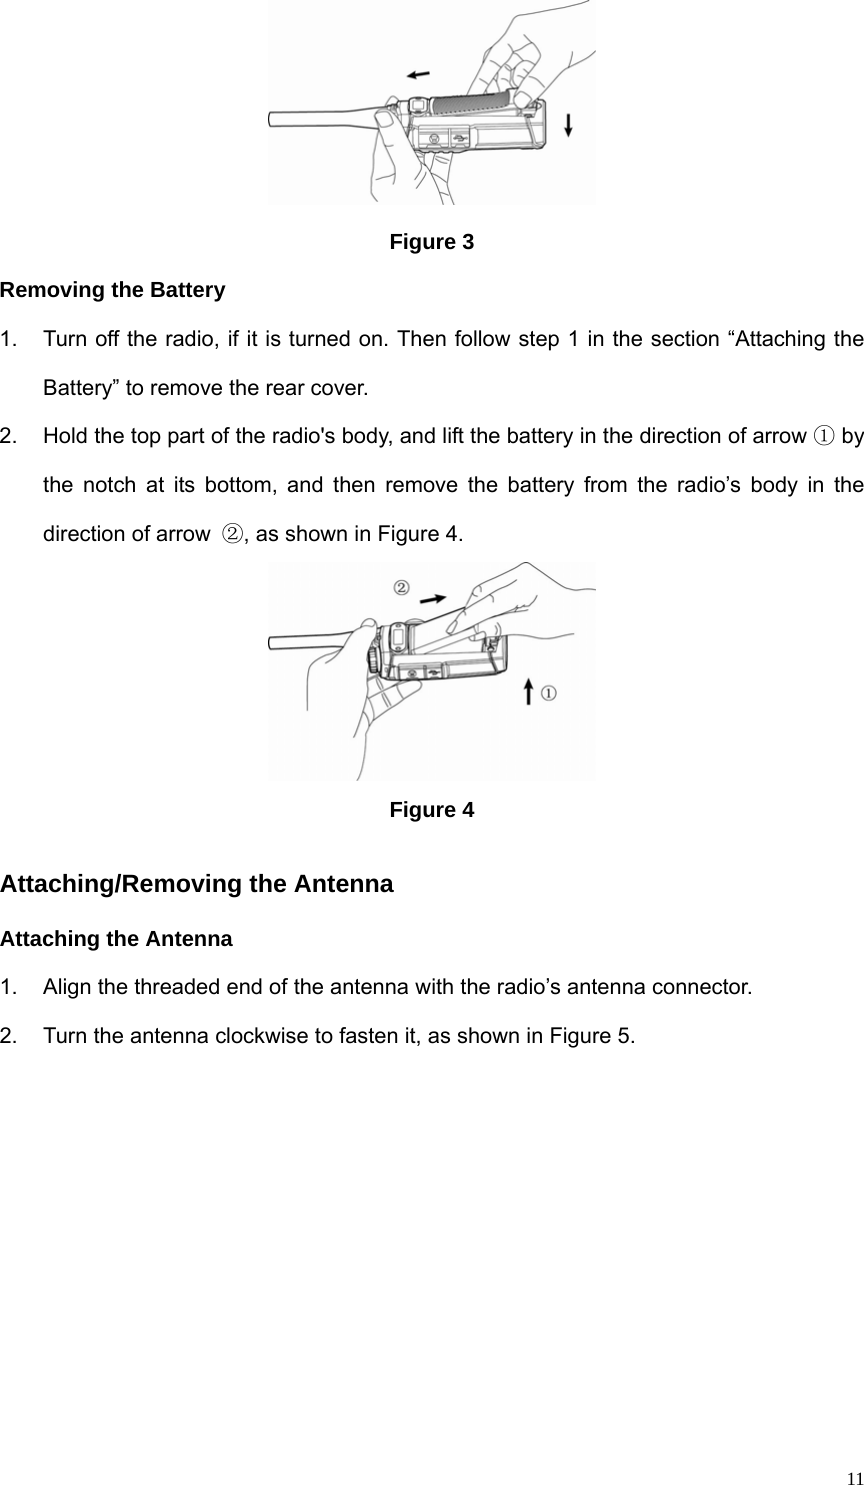  11 Figure 3 Removing the Battery 1.  Turn off the radio, if it is turned on. Then follow step 1 in the section “Attaching the Battery” to remove the rear cover. 2.  Hold the top part of the radio&apos;s body, and lift the battery in the direction of arrow ① by the notch at its bottom, and then remove the battery from the radio’s body in the direction of arrow  ②, as shown in Figure 4.    Figure 4 Attaching/Removing the Antenna Attaching the Antenna 1.  Align the threaded end of the antenna with the radio’s antenna connector.   2.  Turn the antenna clockwise to fasten it, as shown in Figure 5.   